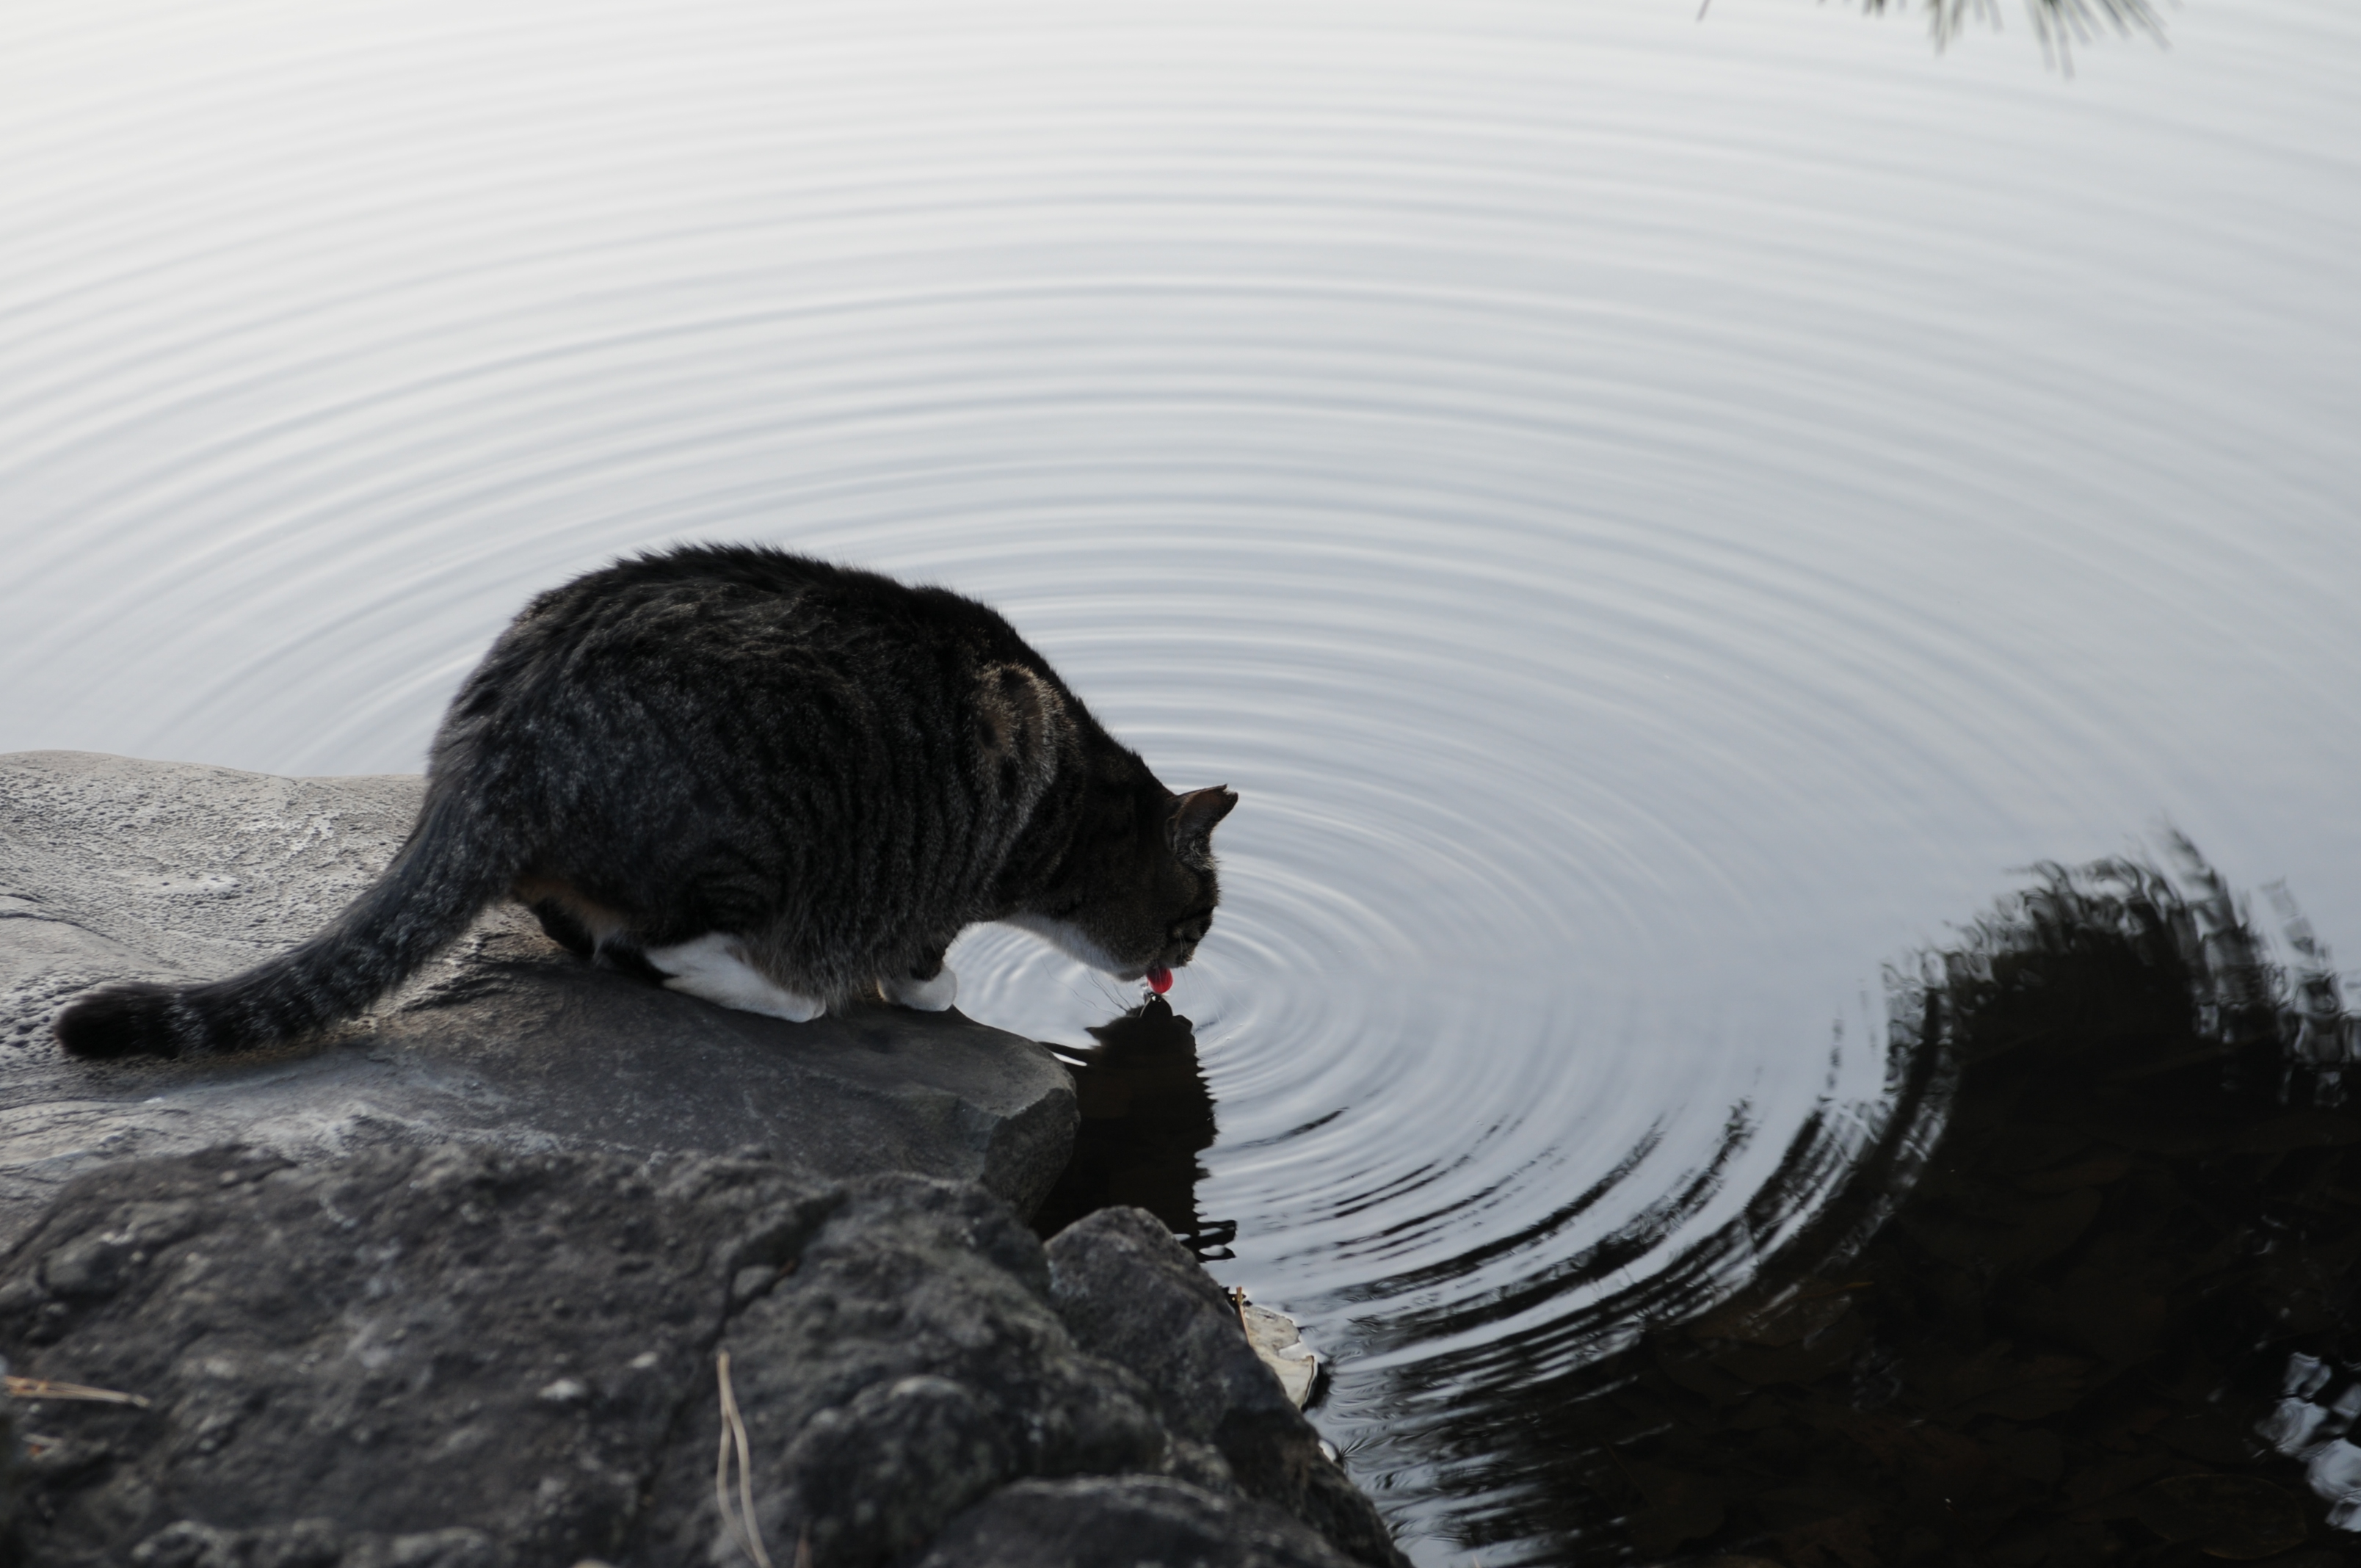 A cat drinks from a pond.